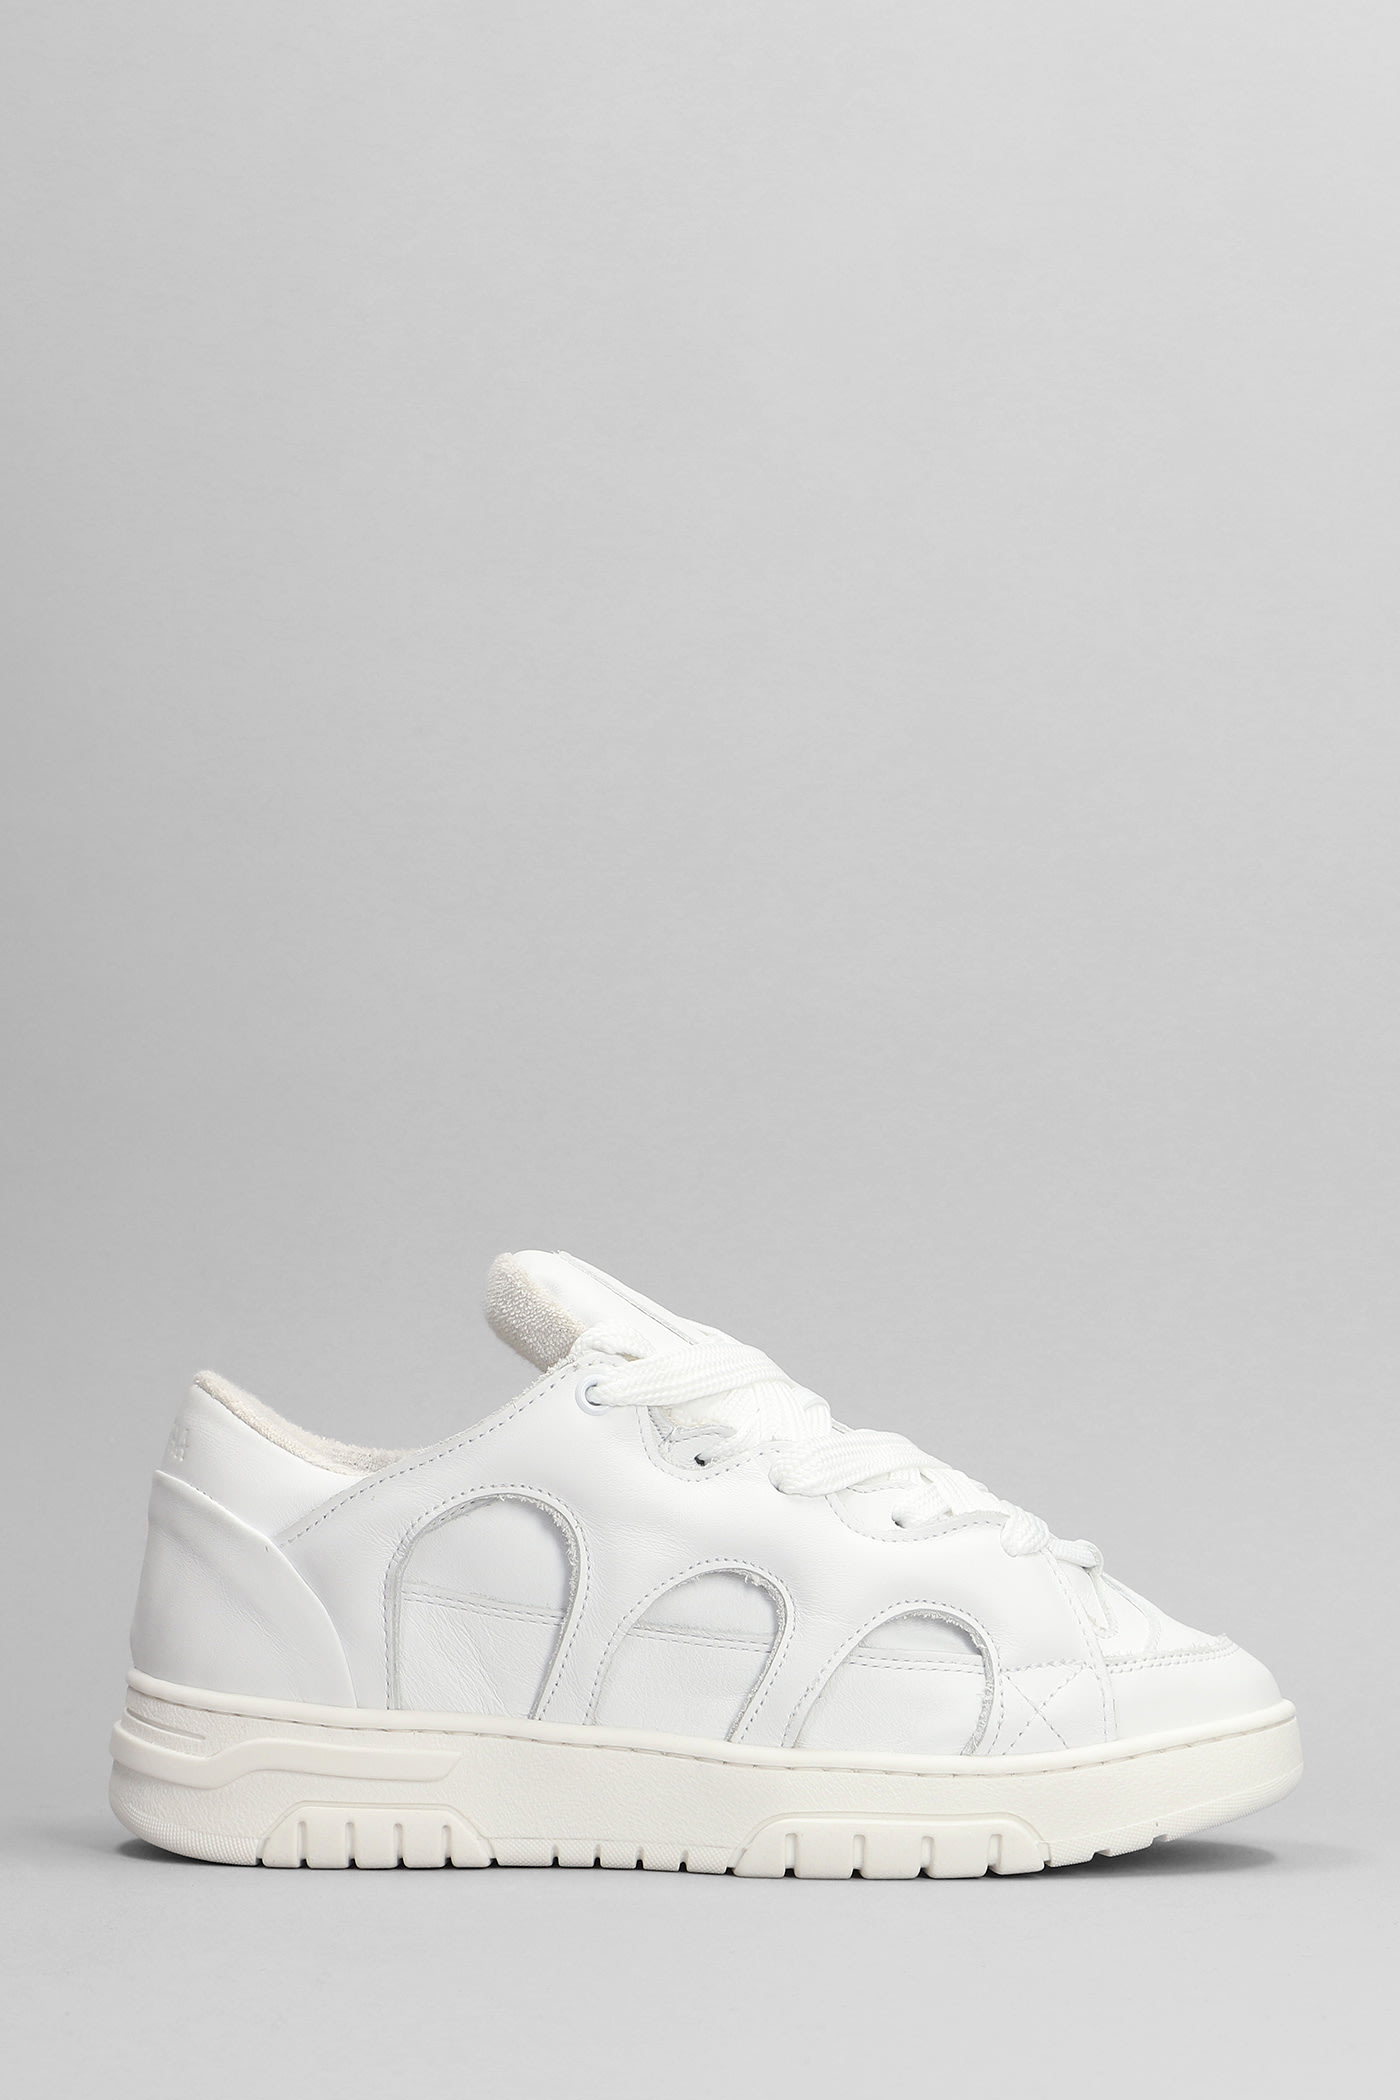 Paura Santha 1 Sneakers In White Leather